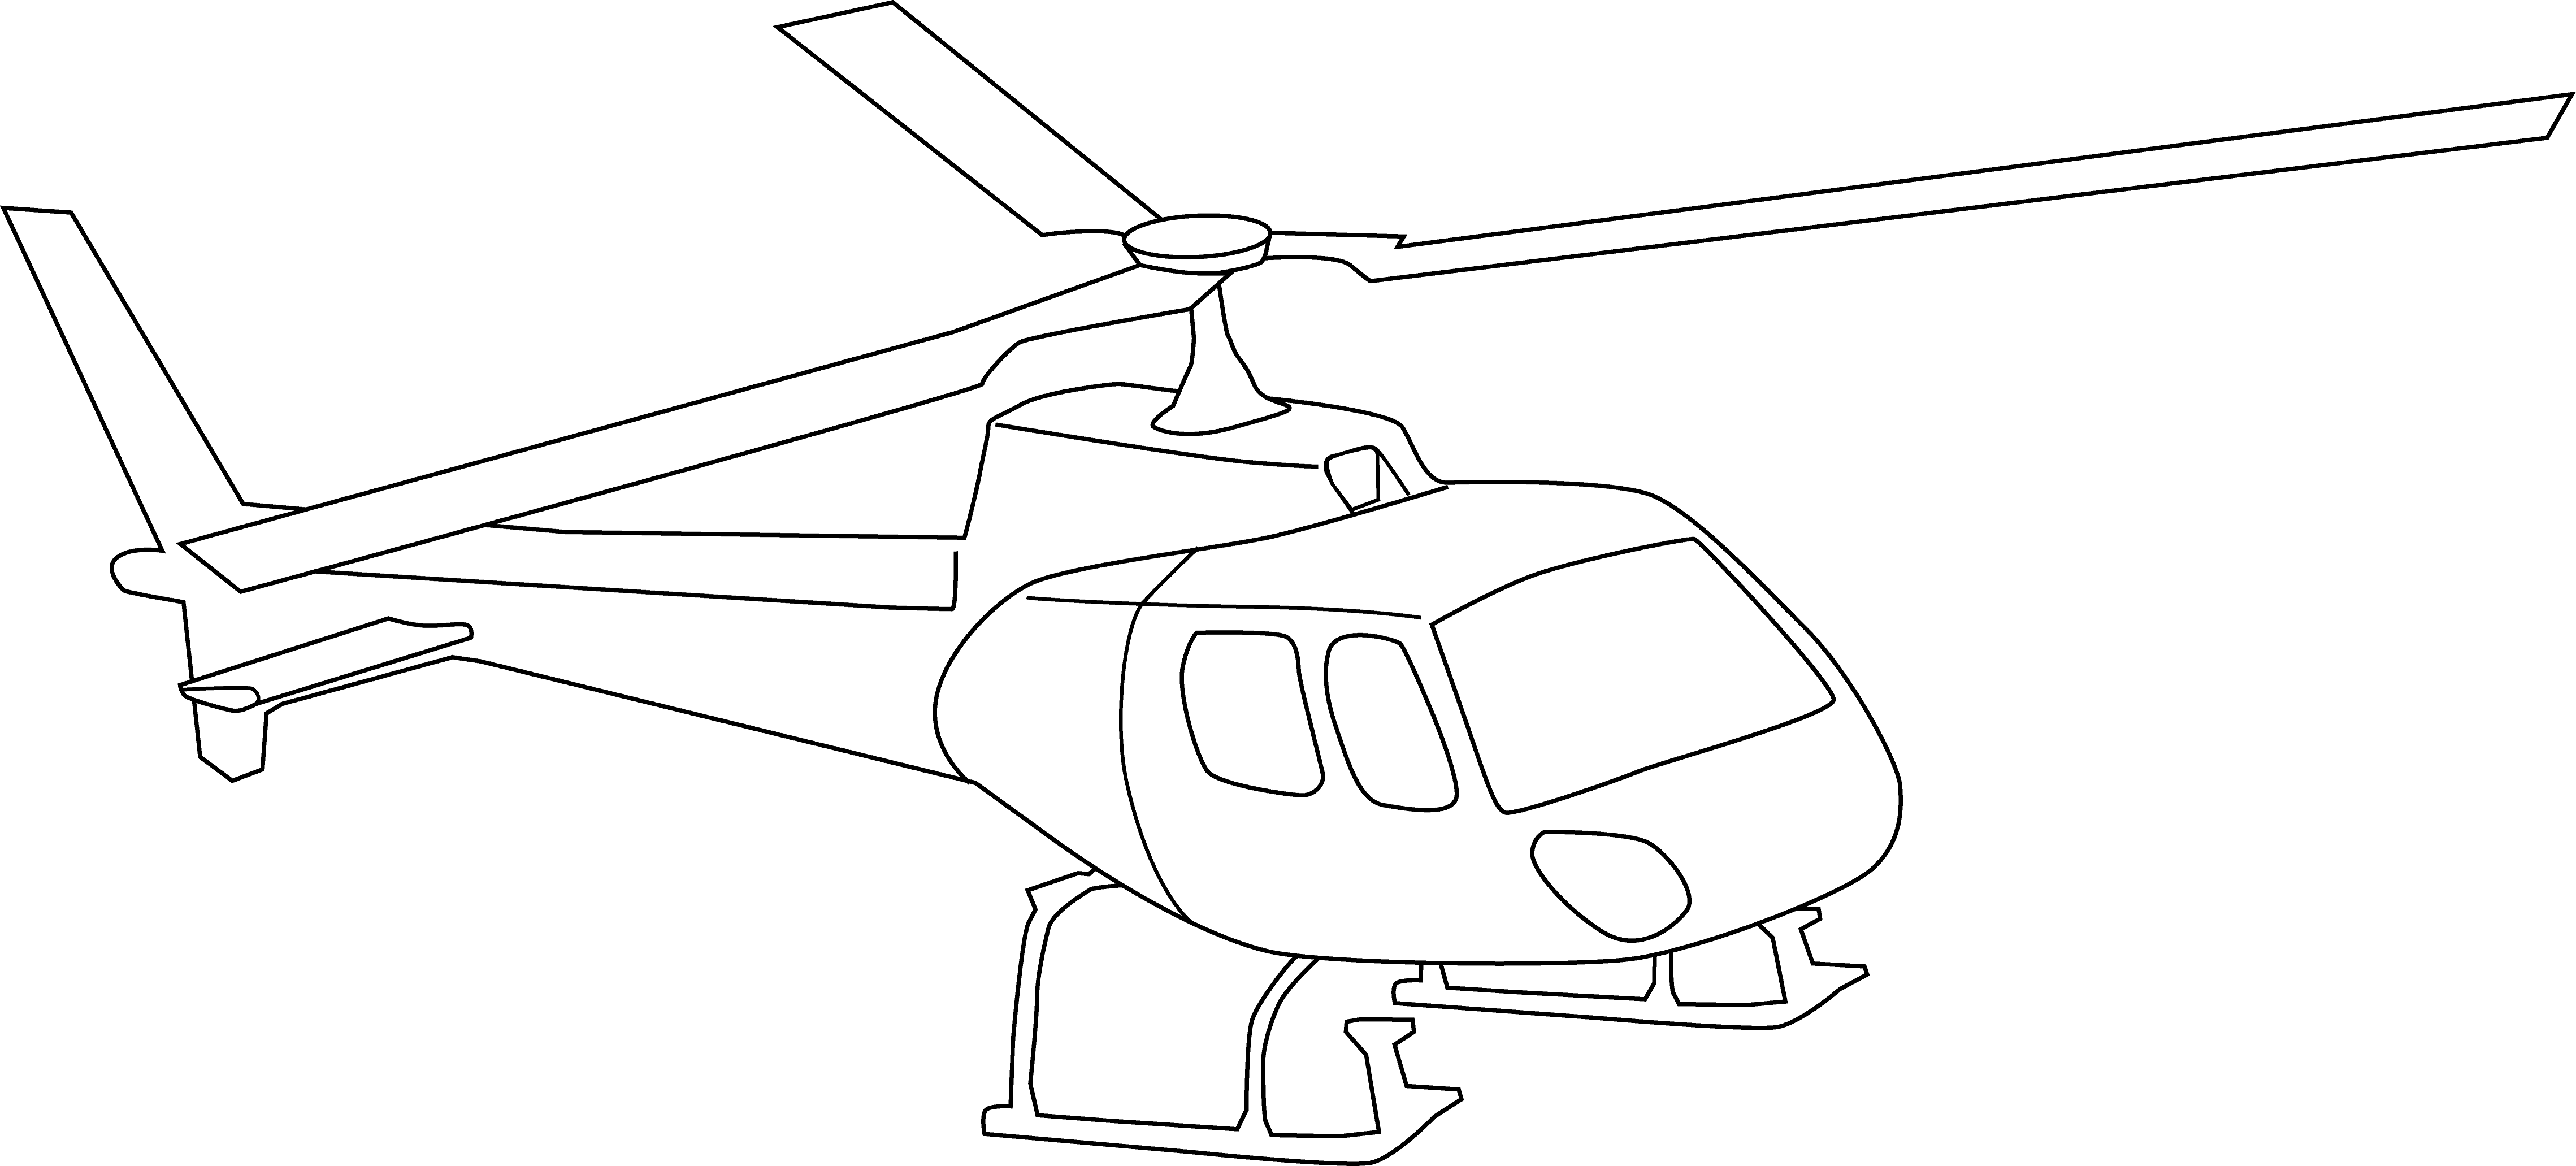 helicopter clipart line art